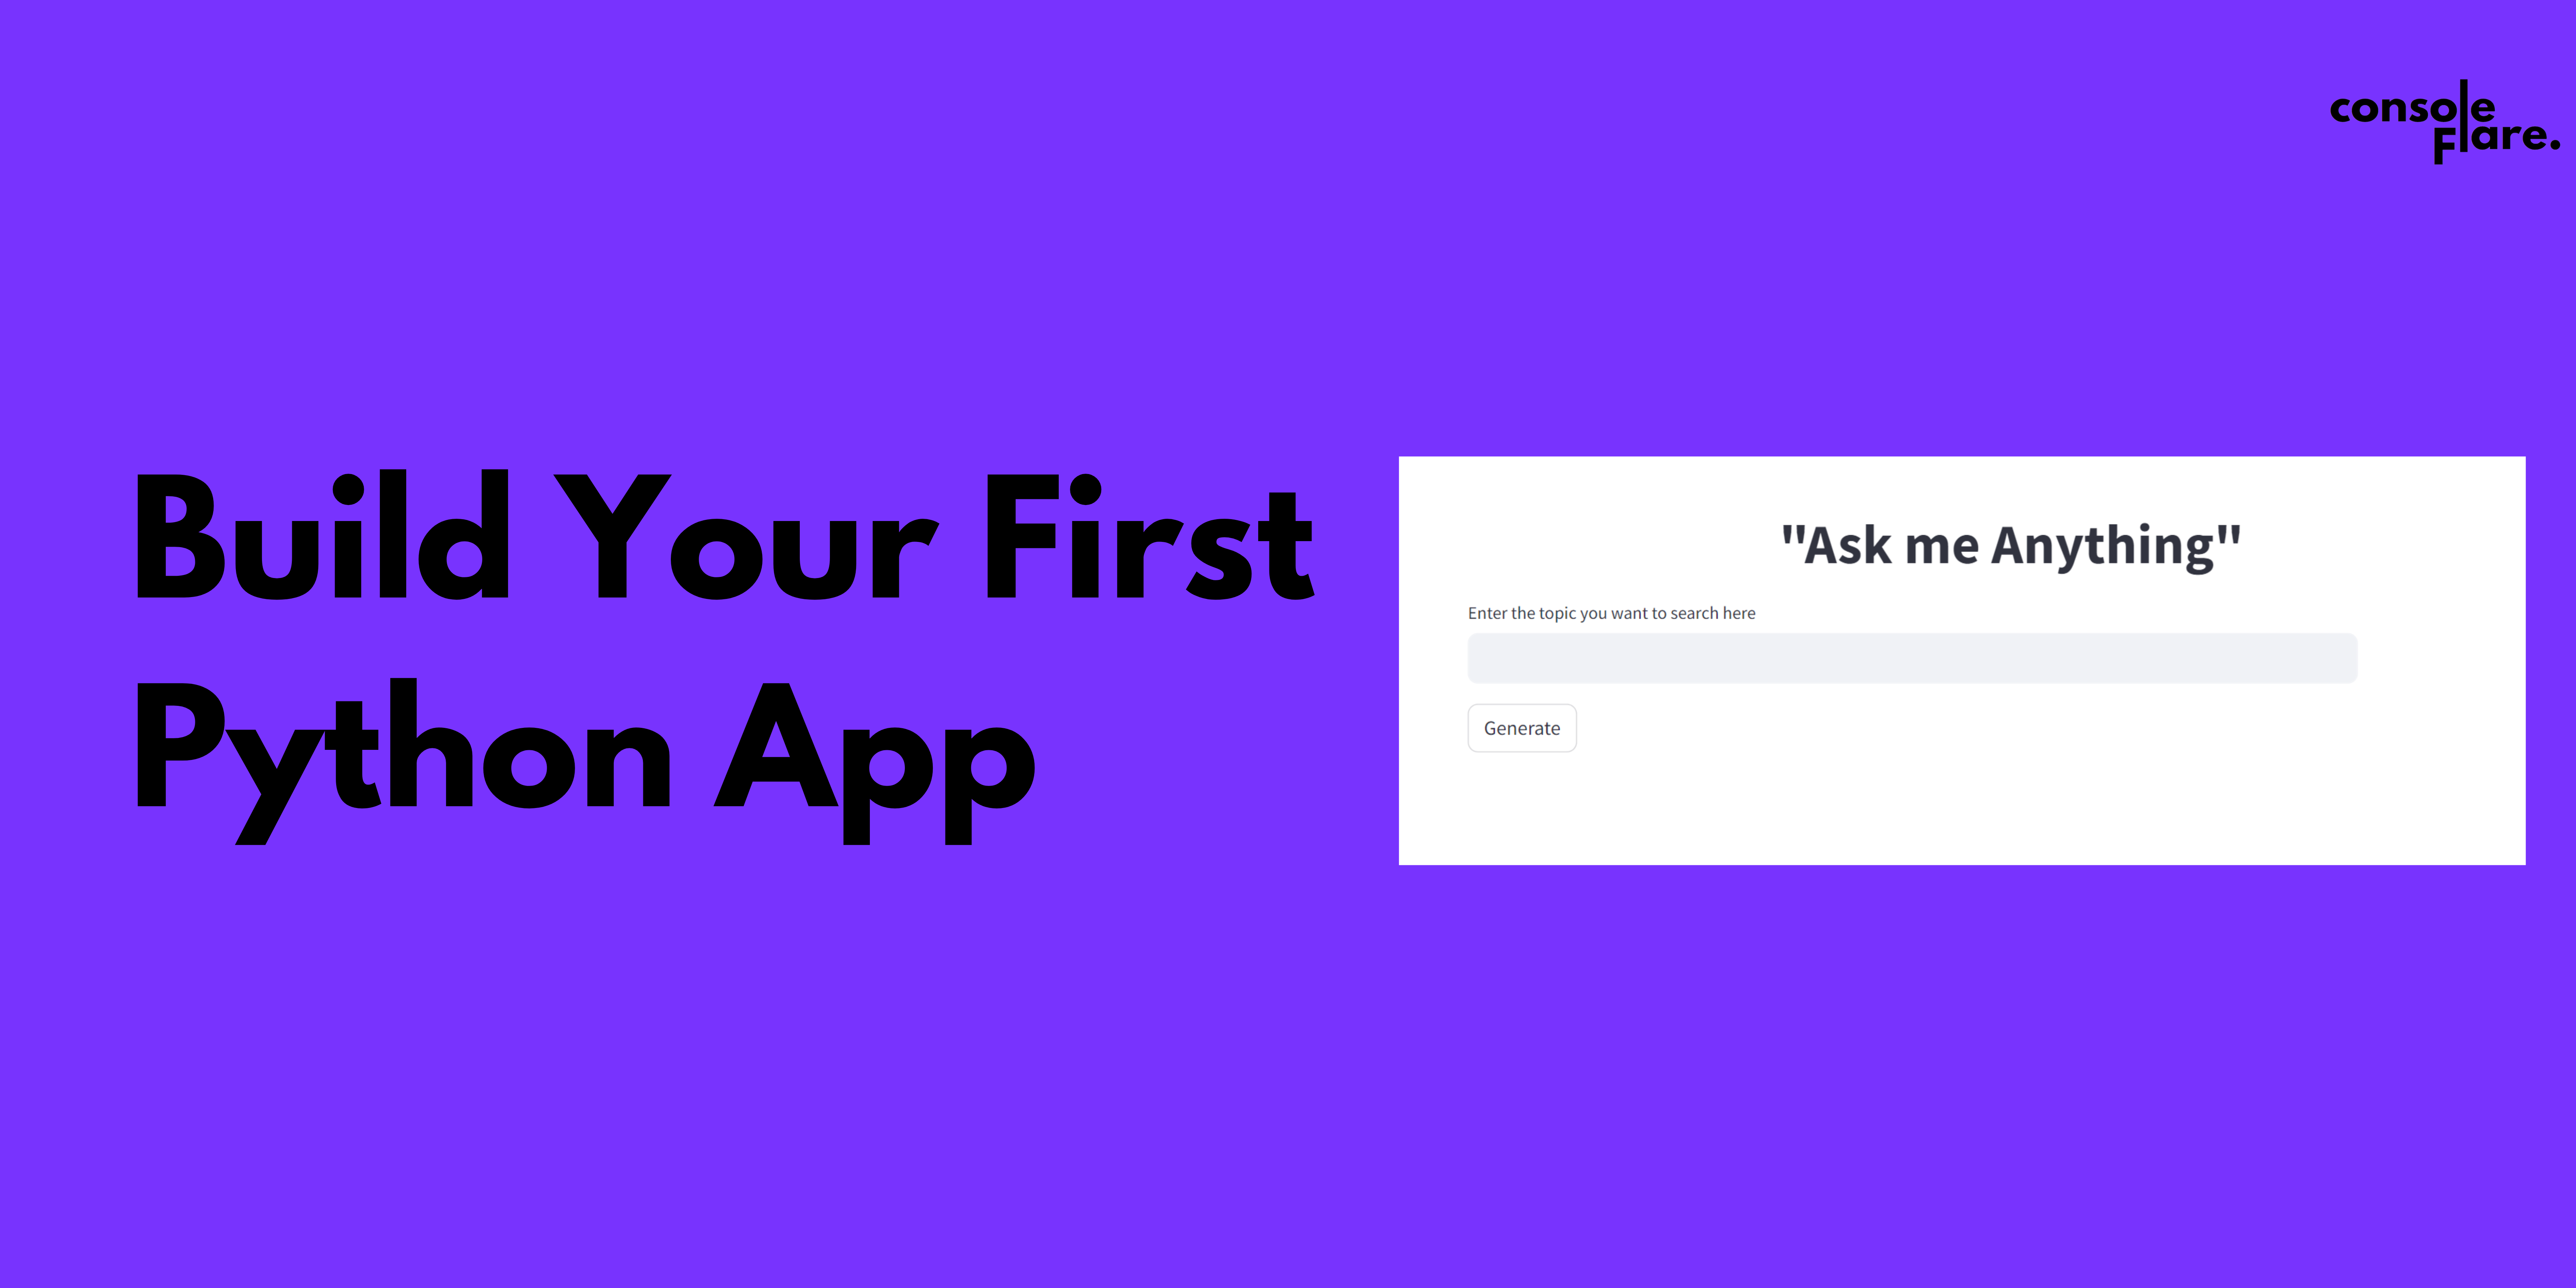 Build your first Python app in 5 minutes: ‘Ask Me Anything’